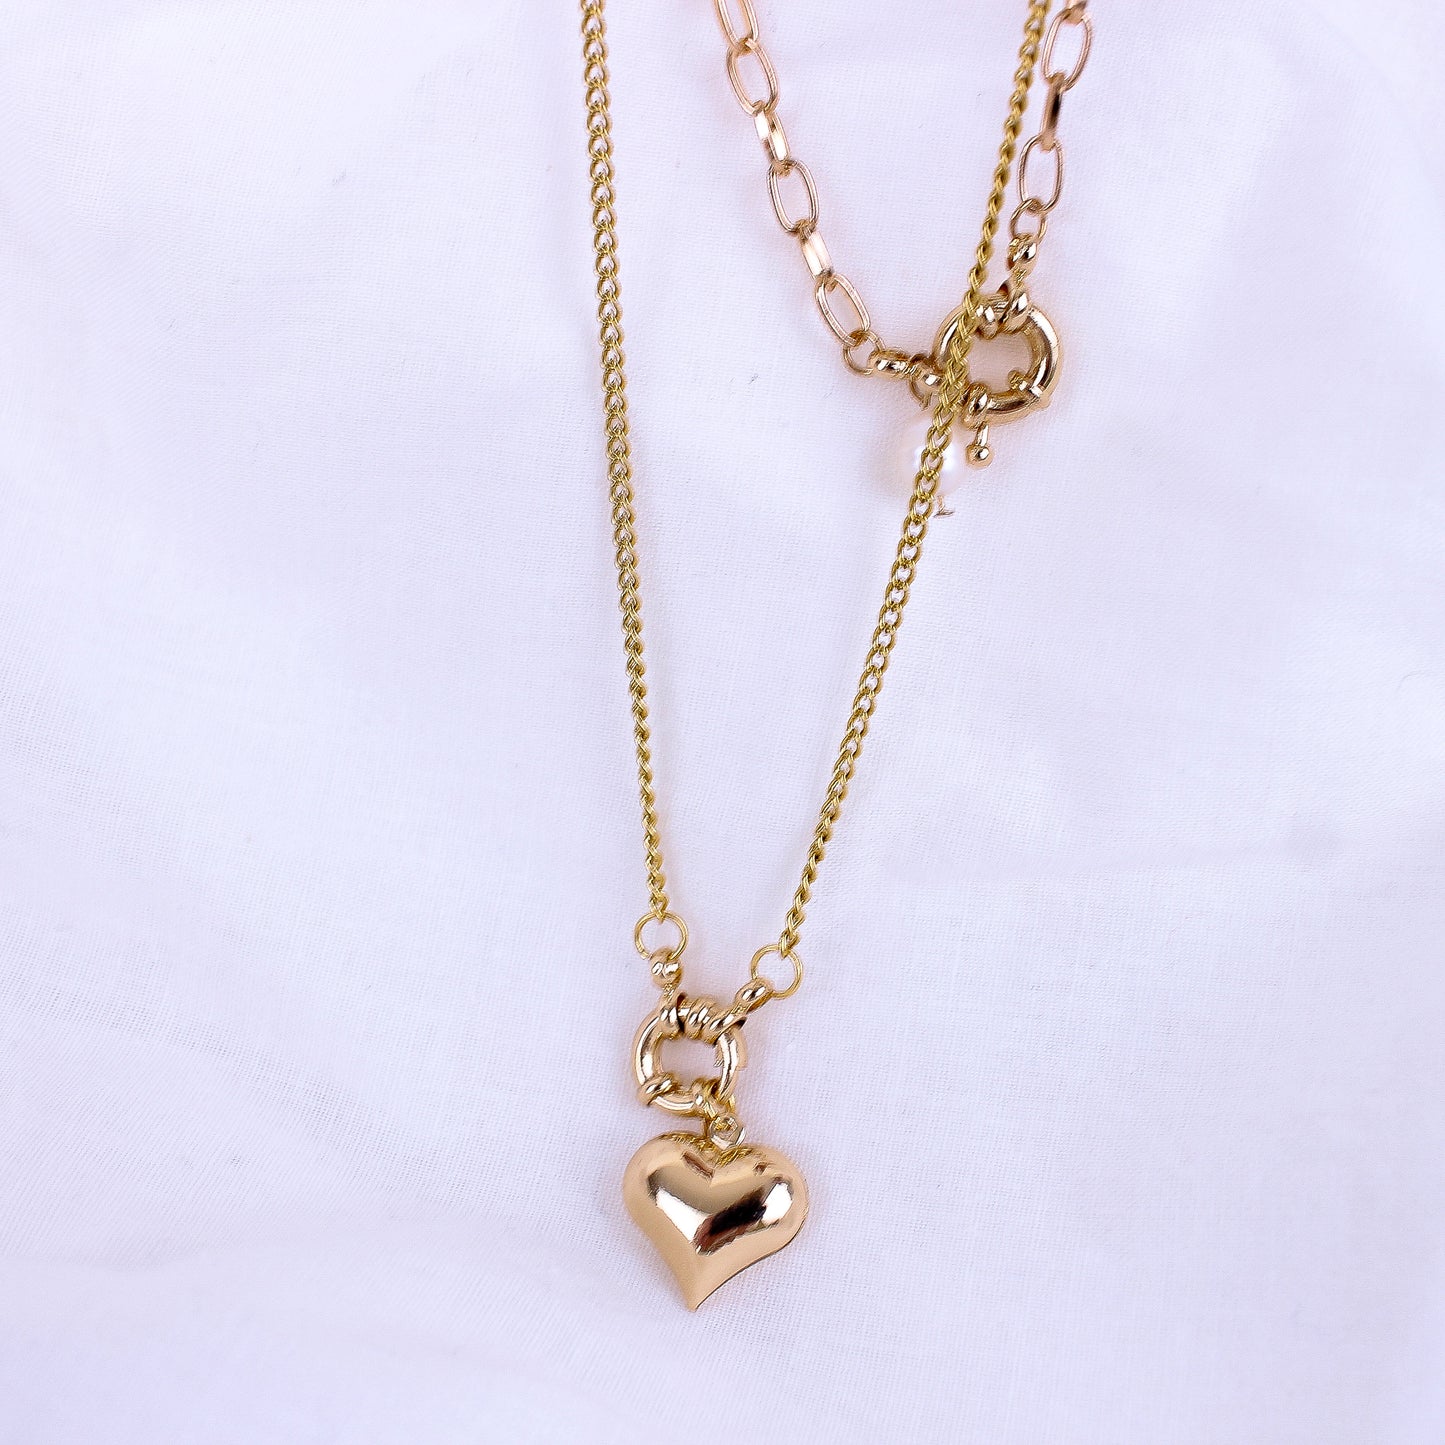 Layered Necklace Set With Gold Pearl Lock Chain And Heart Pendant Necklace